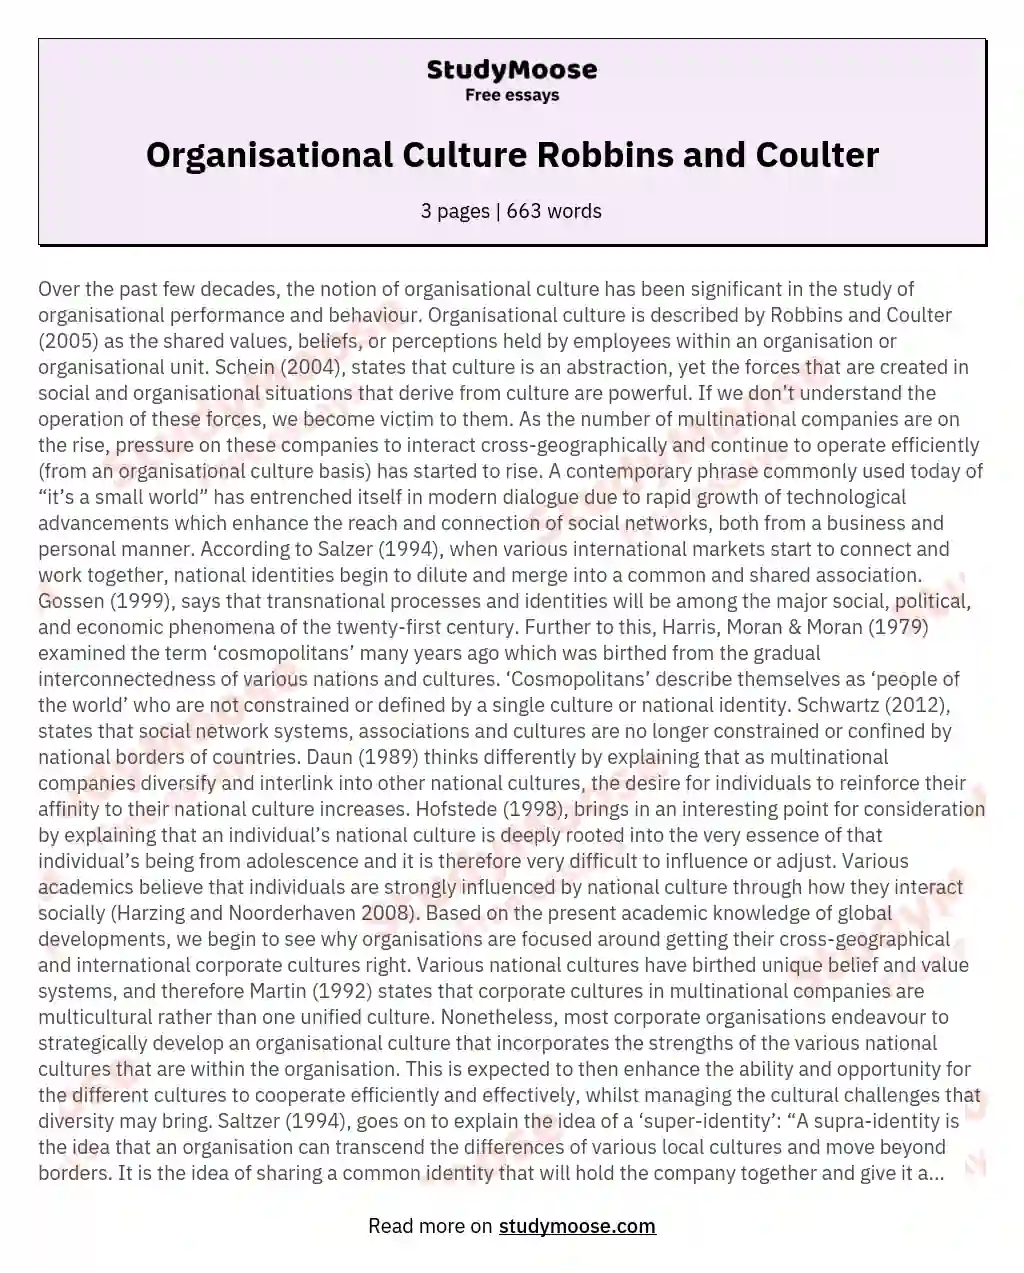 Organisational Culture Robbins and Coulter essay